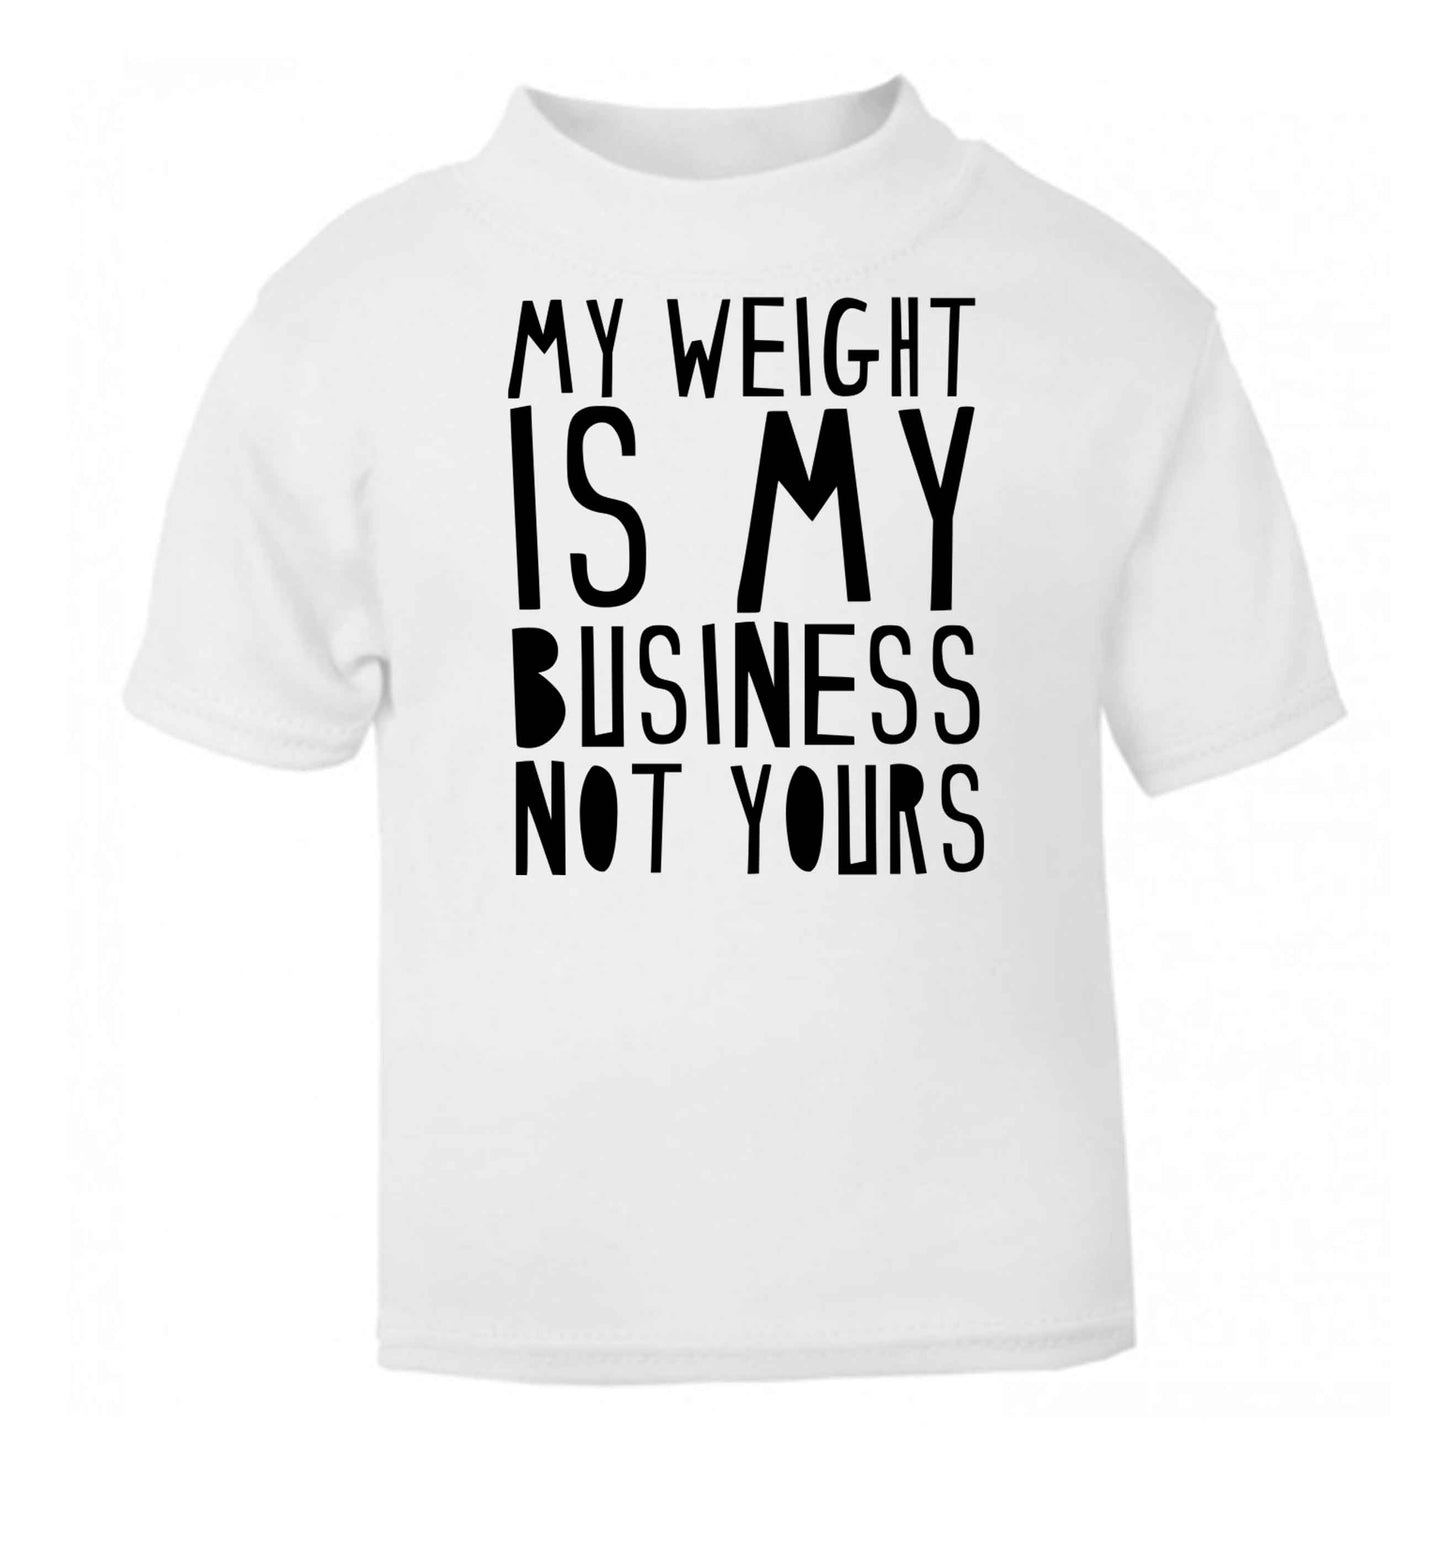 My weight is my business not yours white baby toddler Tshirt 2 Years